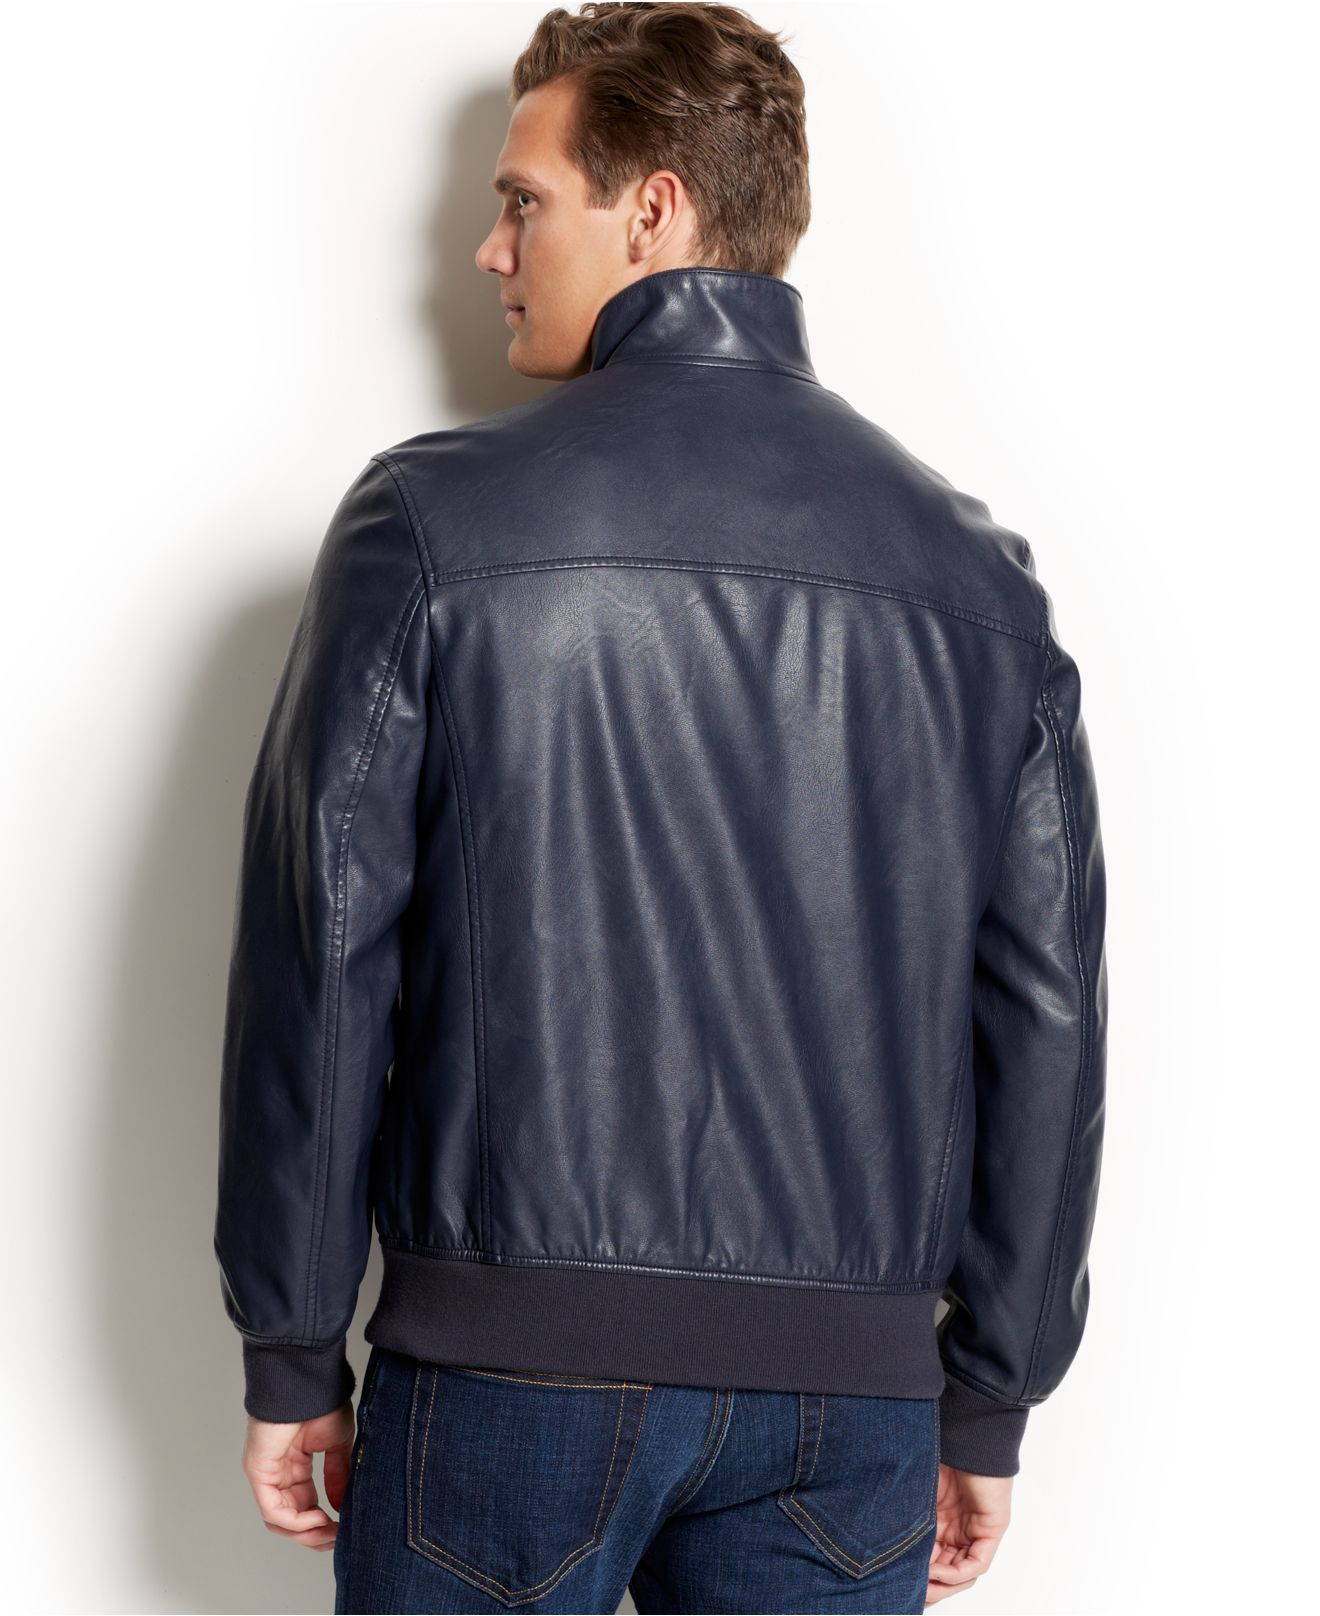 Tommy Hilfiger Faux Leather Bomber Jacket in Navy (Blue) for Men - Lyst